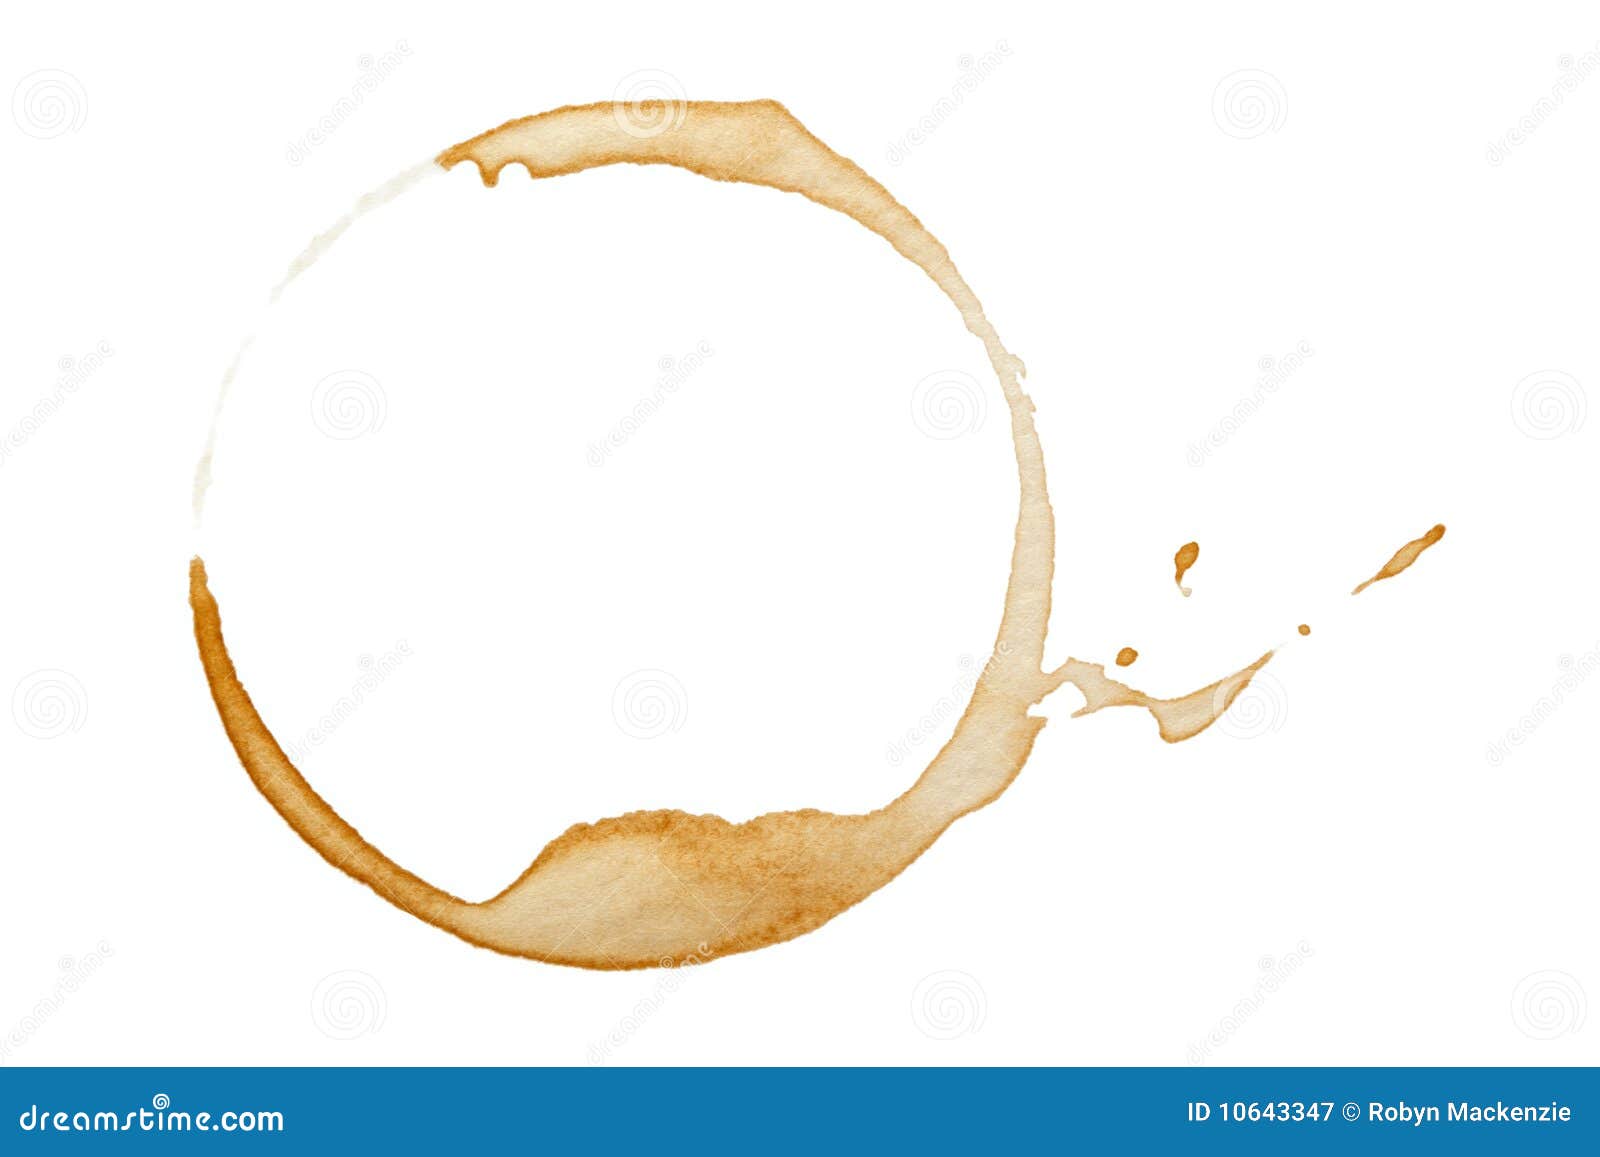 coffee stain clipart free - photo #11